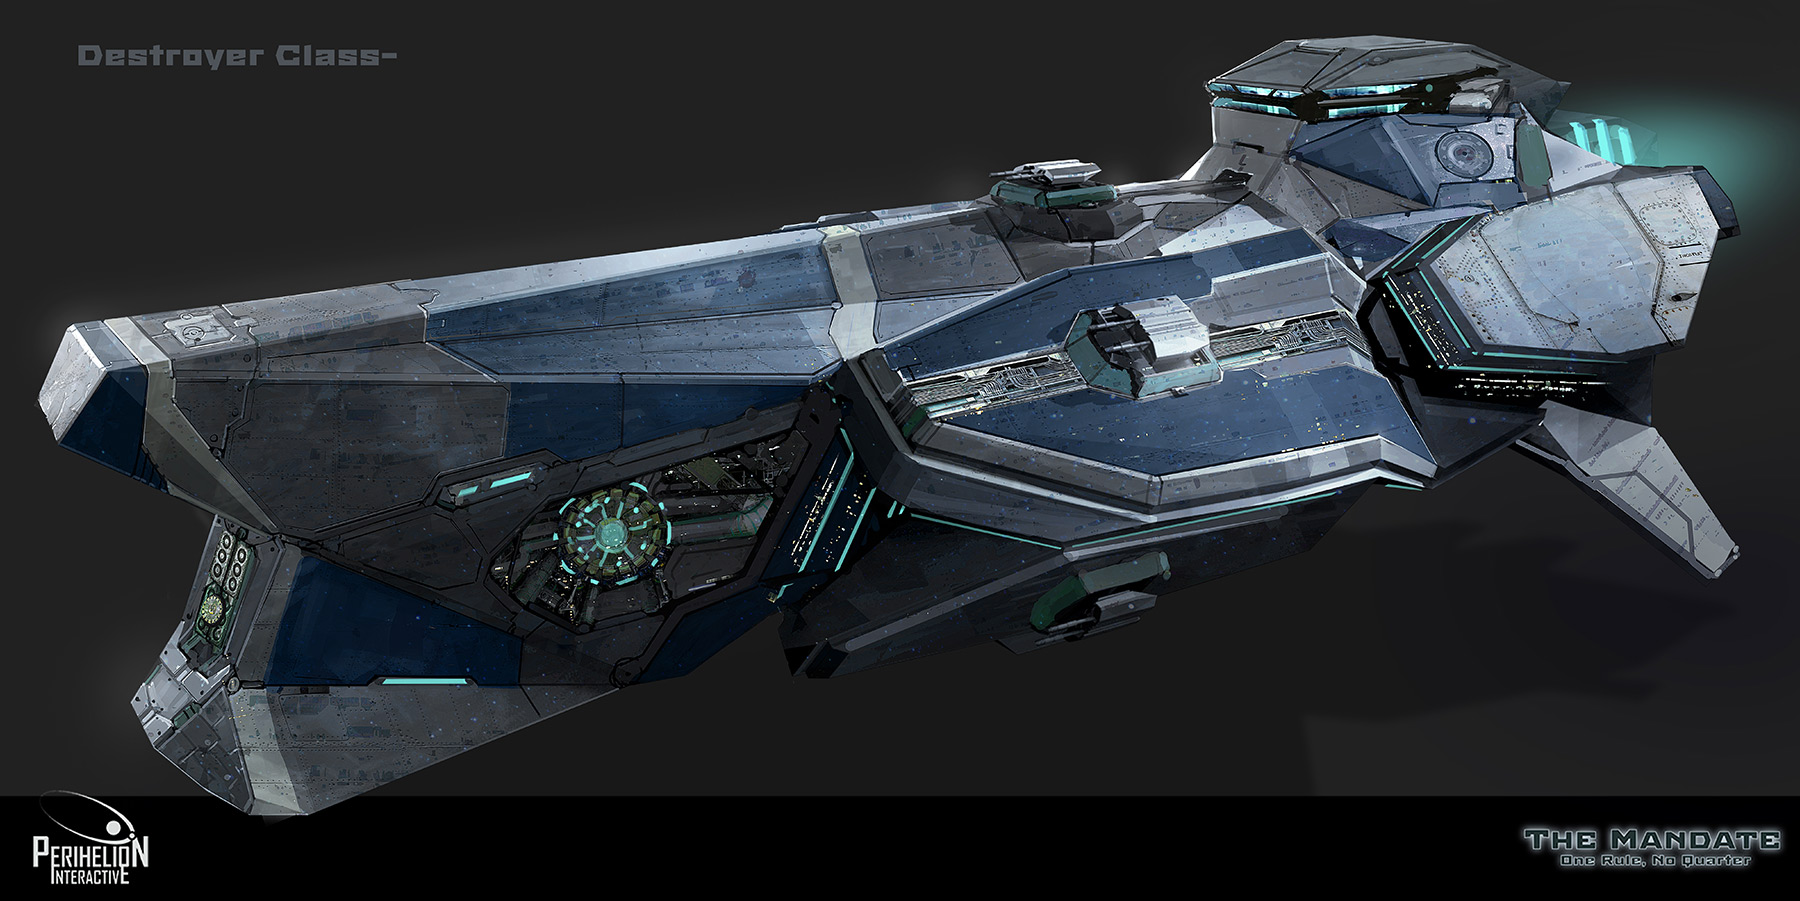 Keywords: high resolution definition hd wide format concept spaceship ...